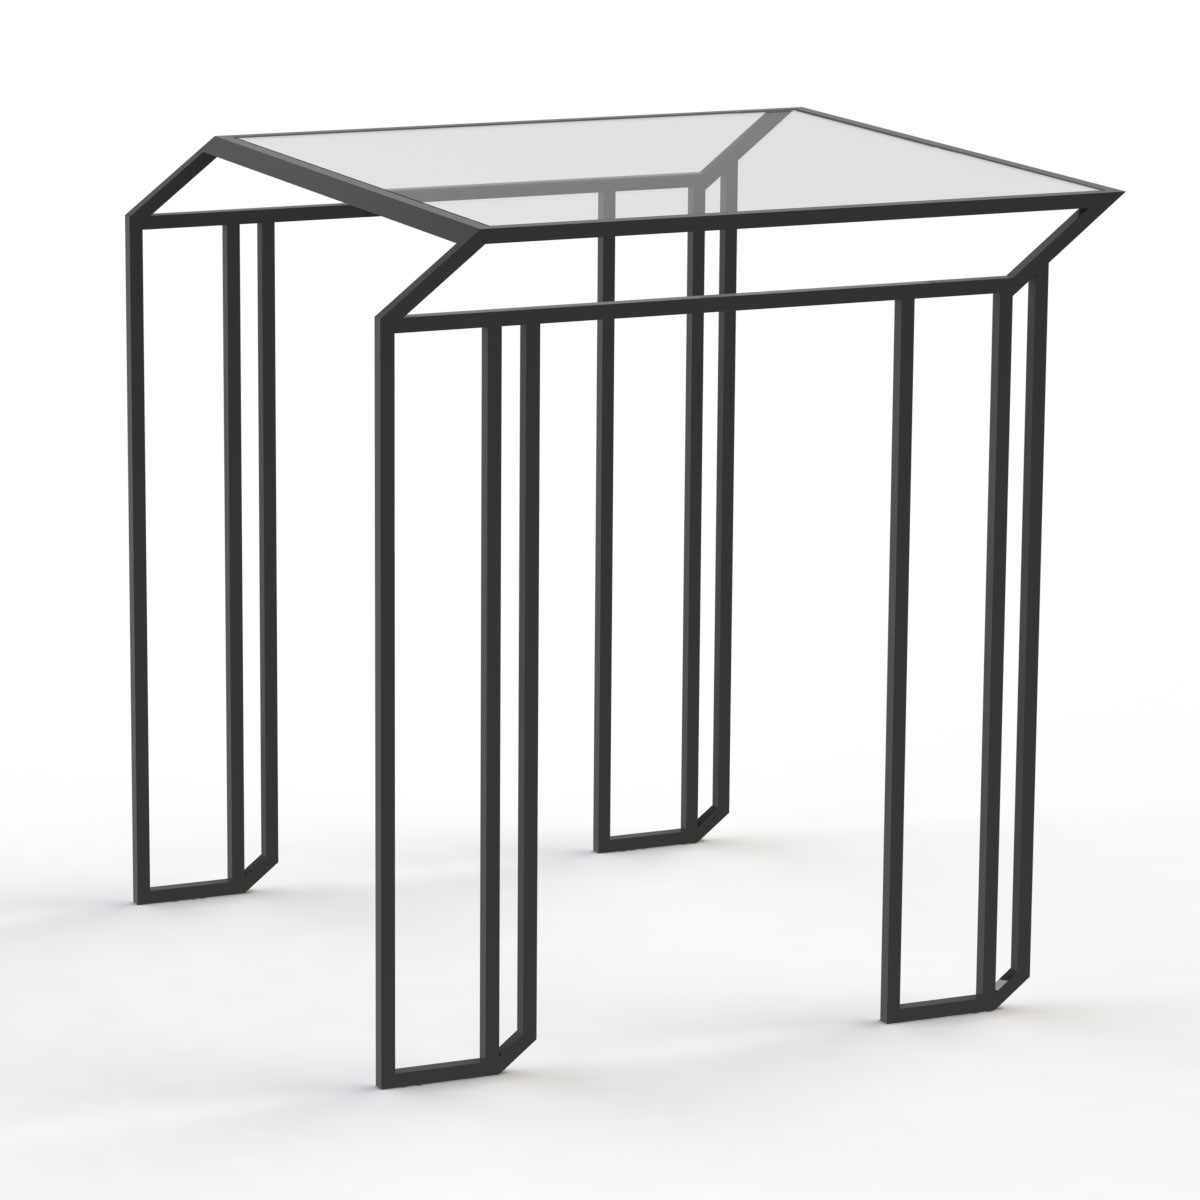 table desk mimial clean zasso Hirotaka Matsui japanese frame metal Perspective illusion contemporary design